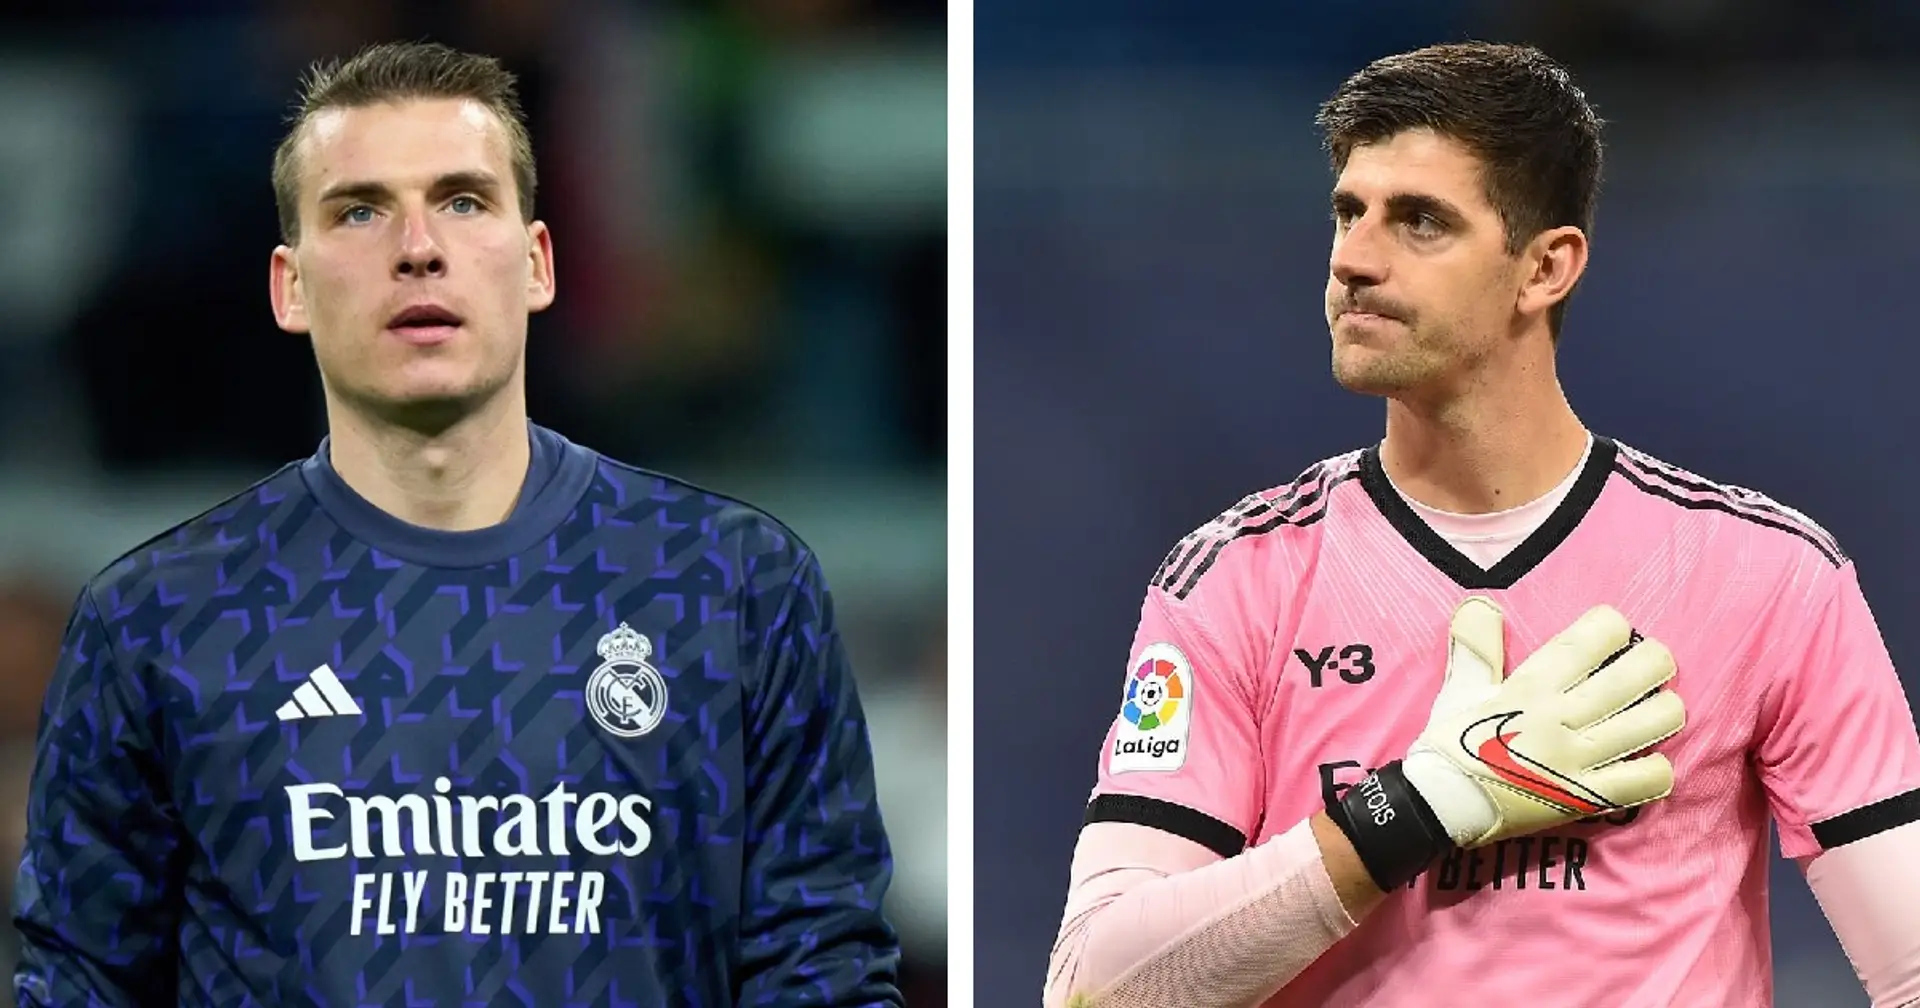 Real Madrid 'prepare new Lunin contract' - Courtois decision made